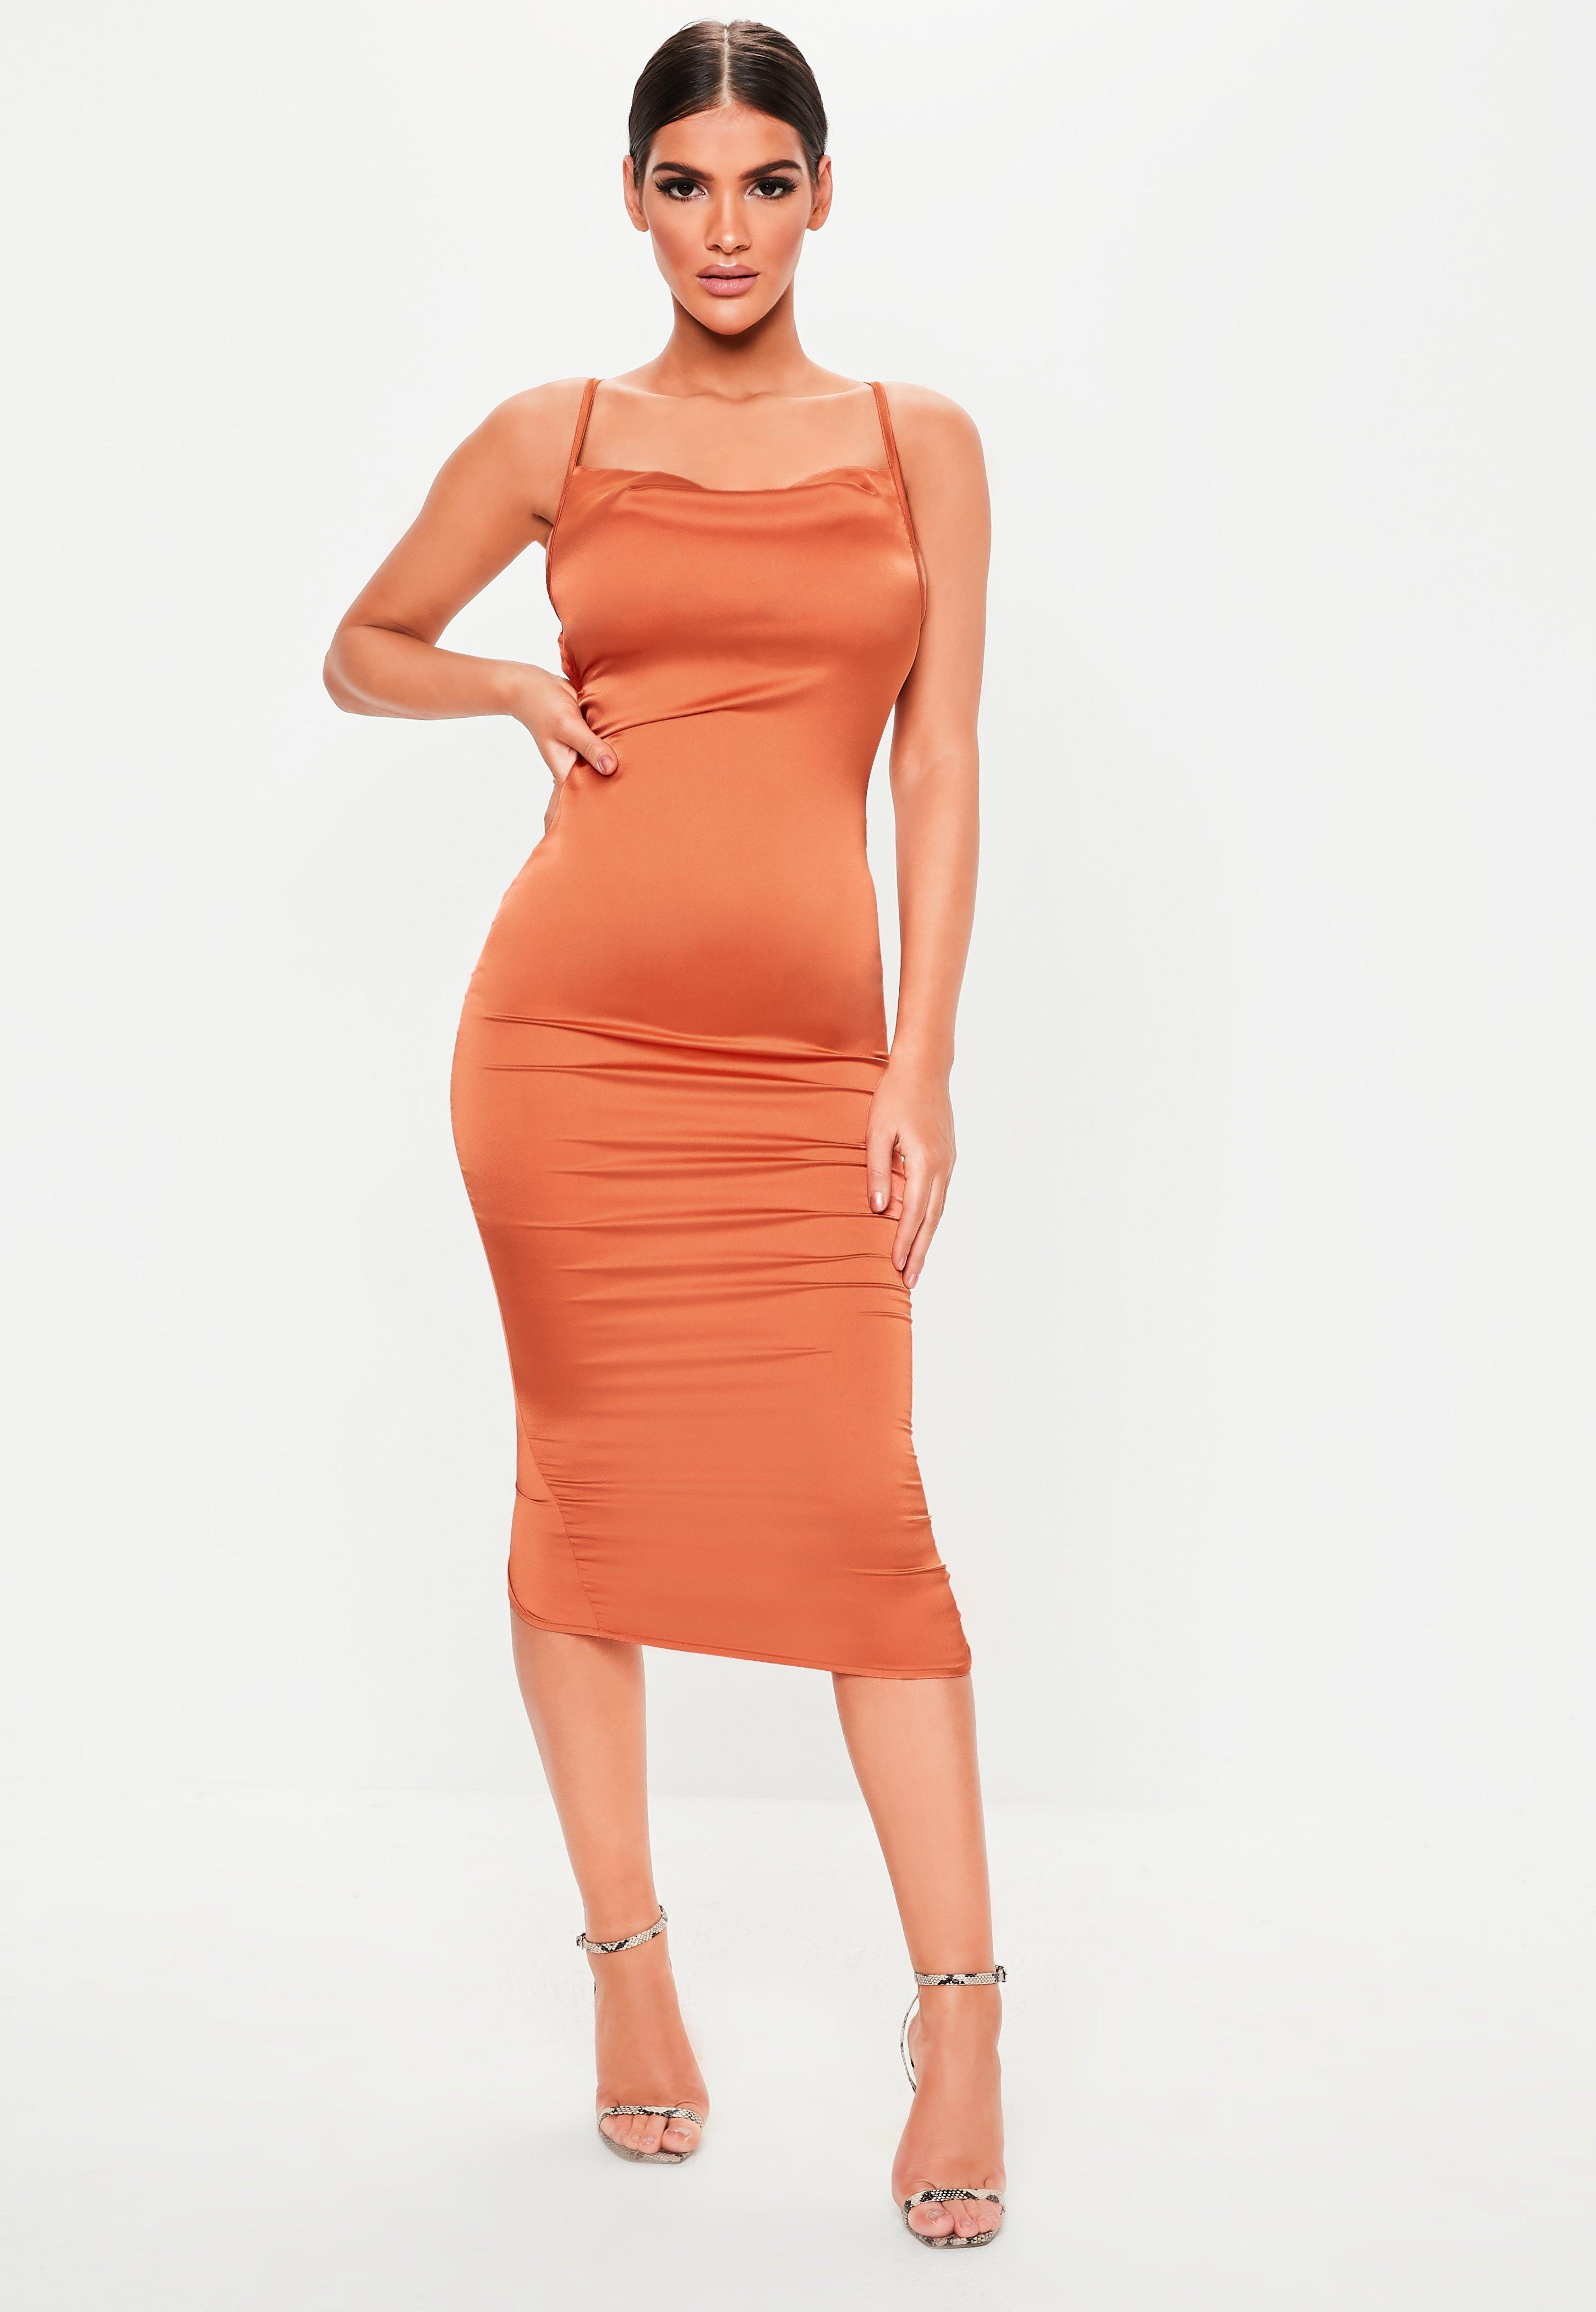 Missguided Rust Satin Lace Up Back Midi Dress in Orange Lyst